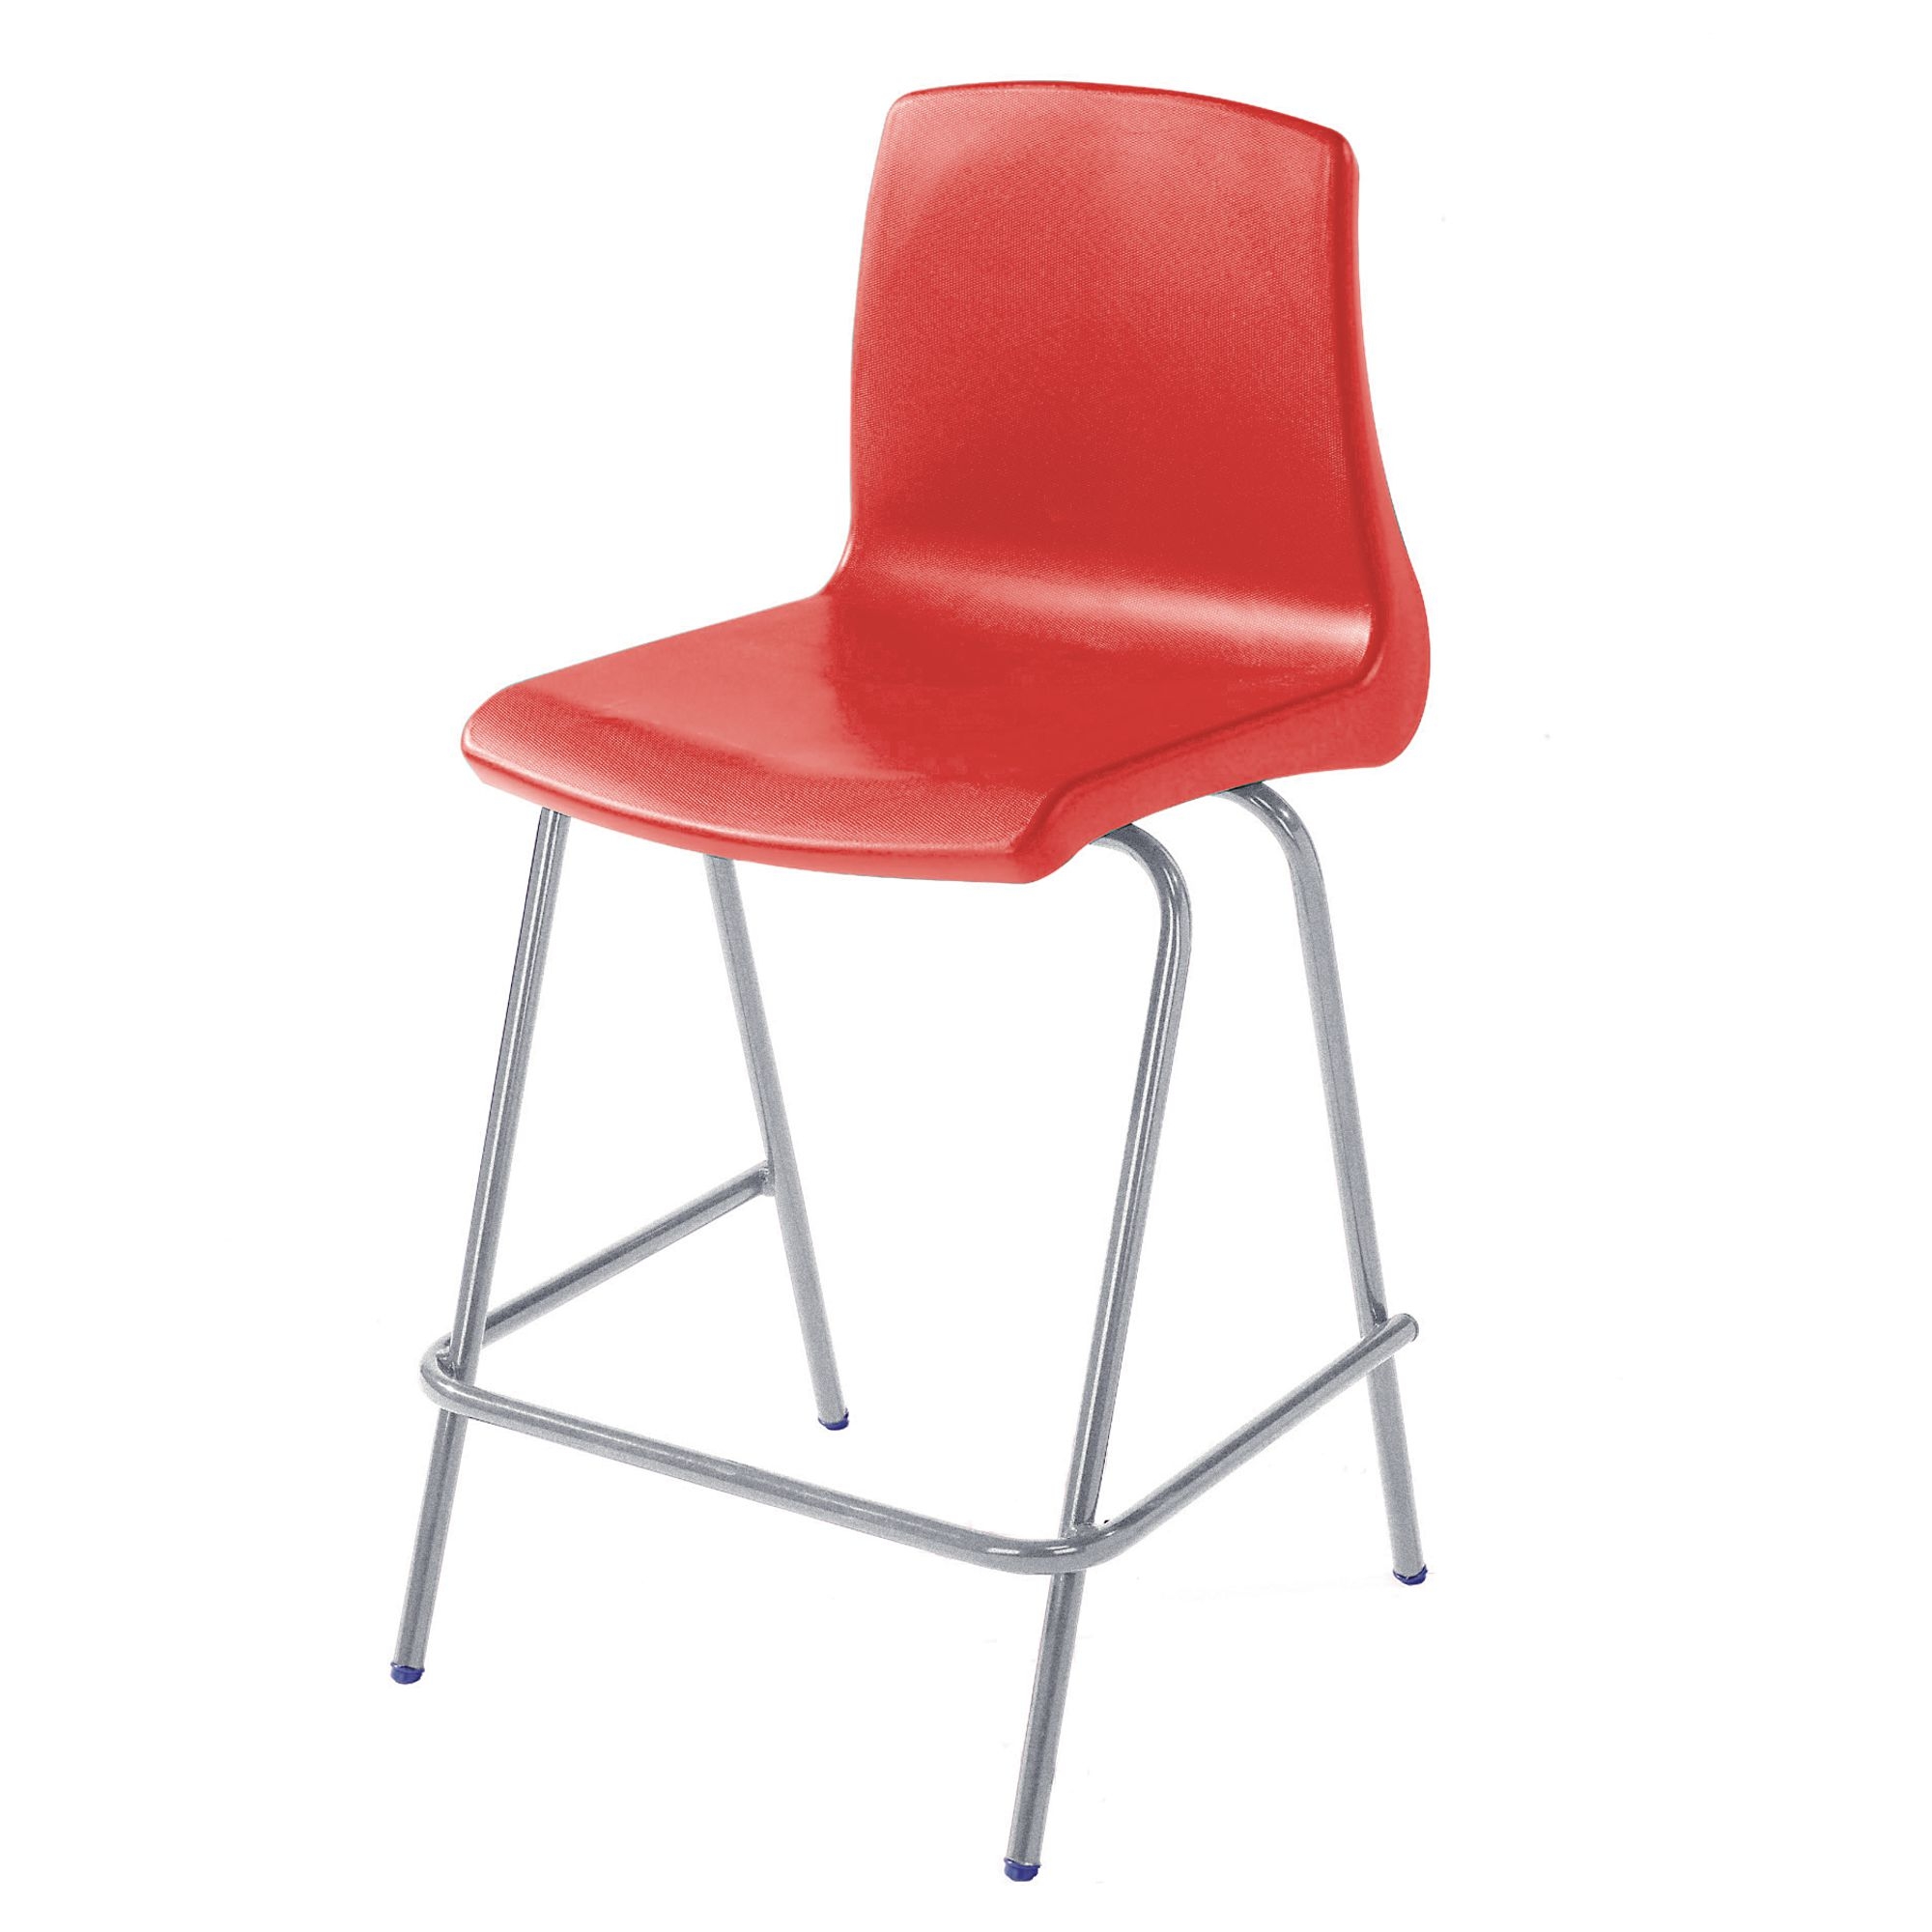 NP Stool - Seat height: 610mm - Red